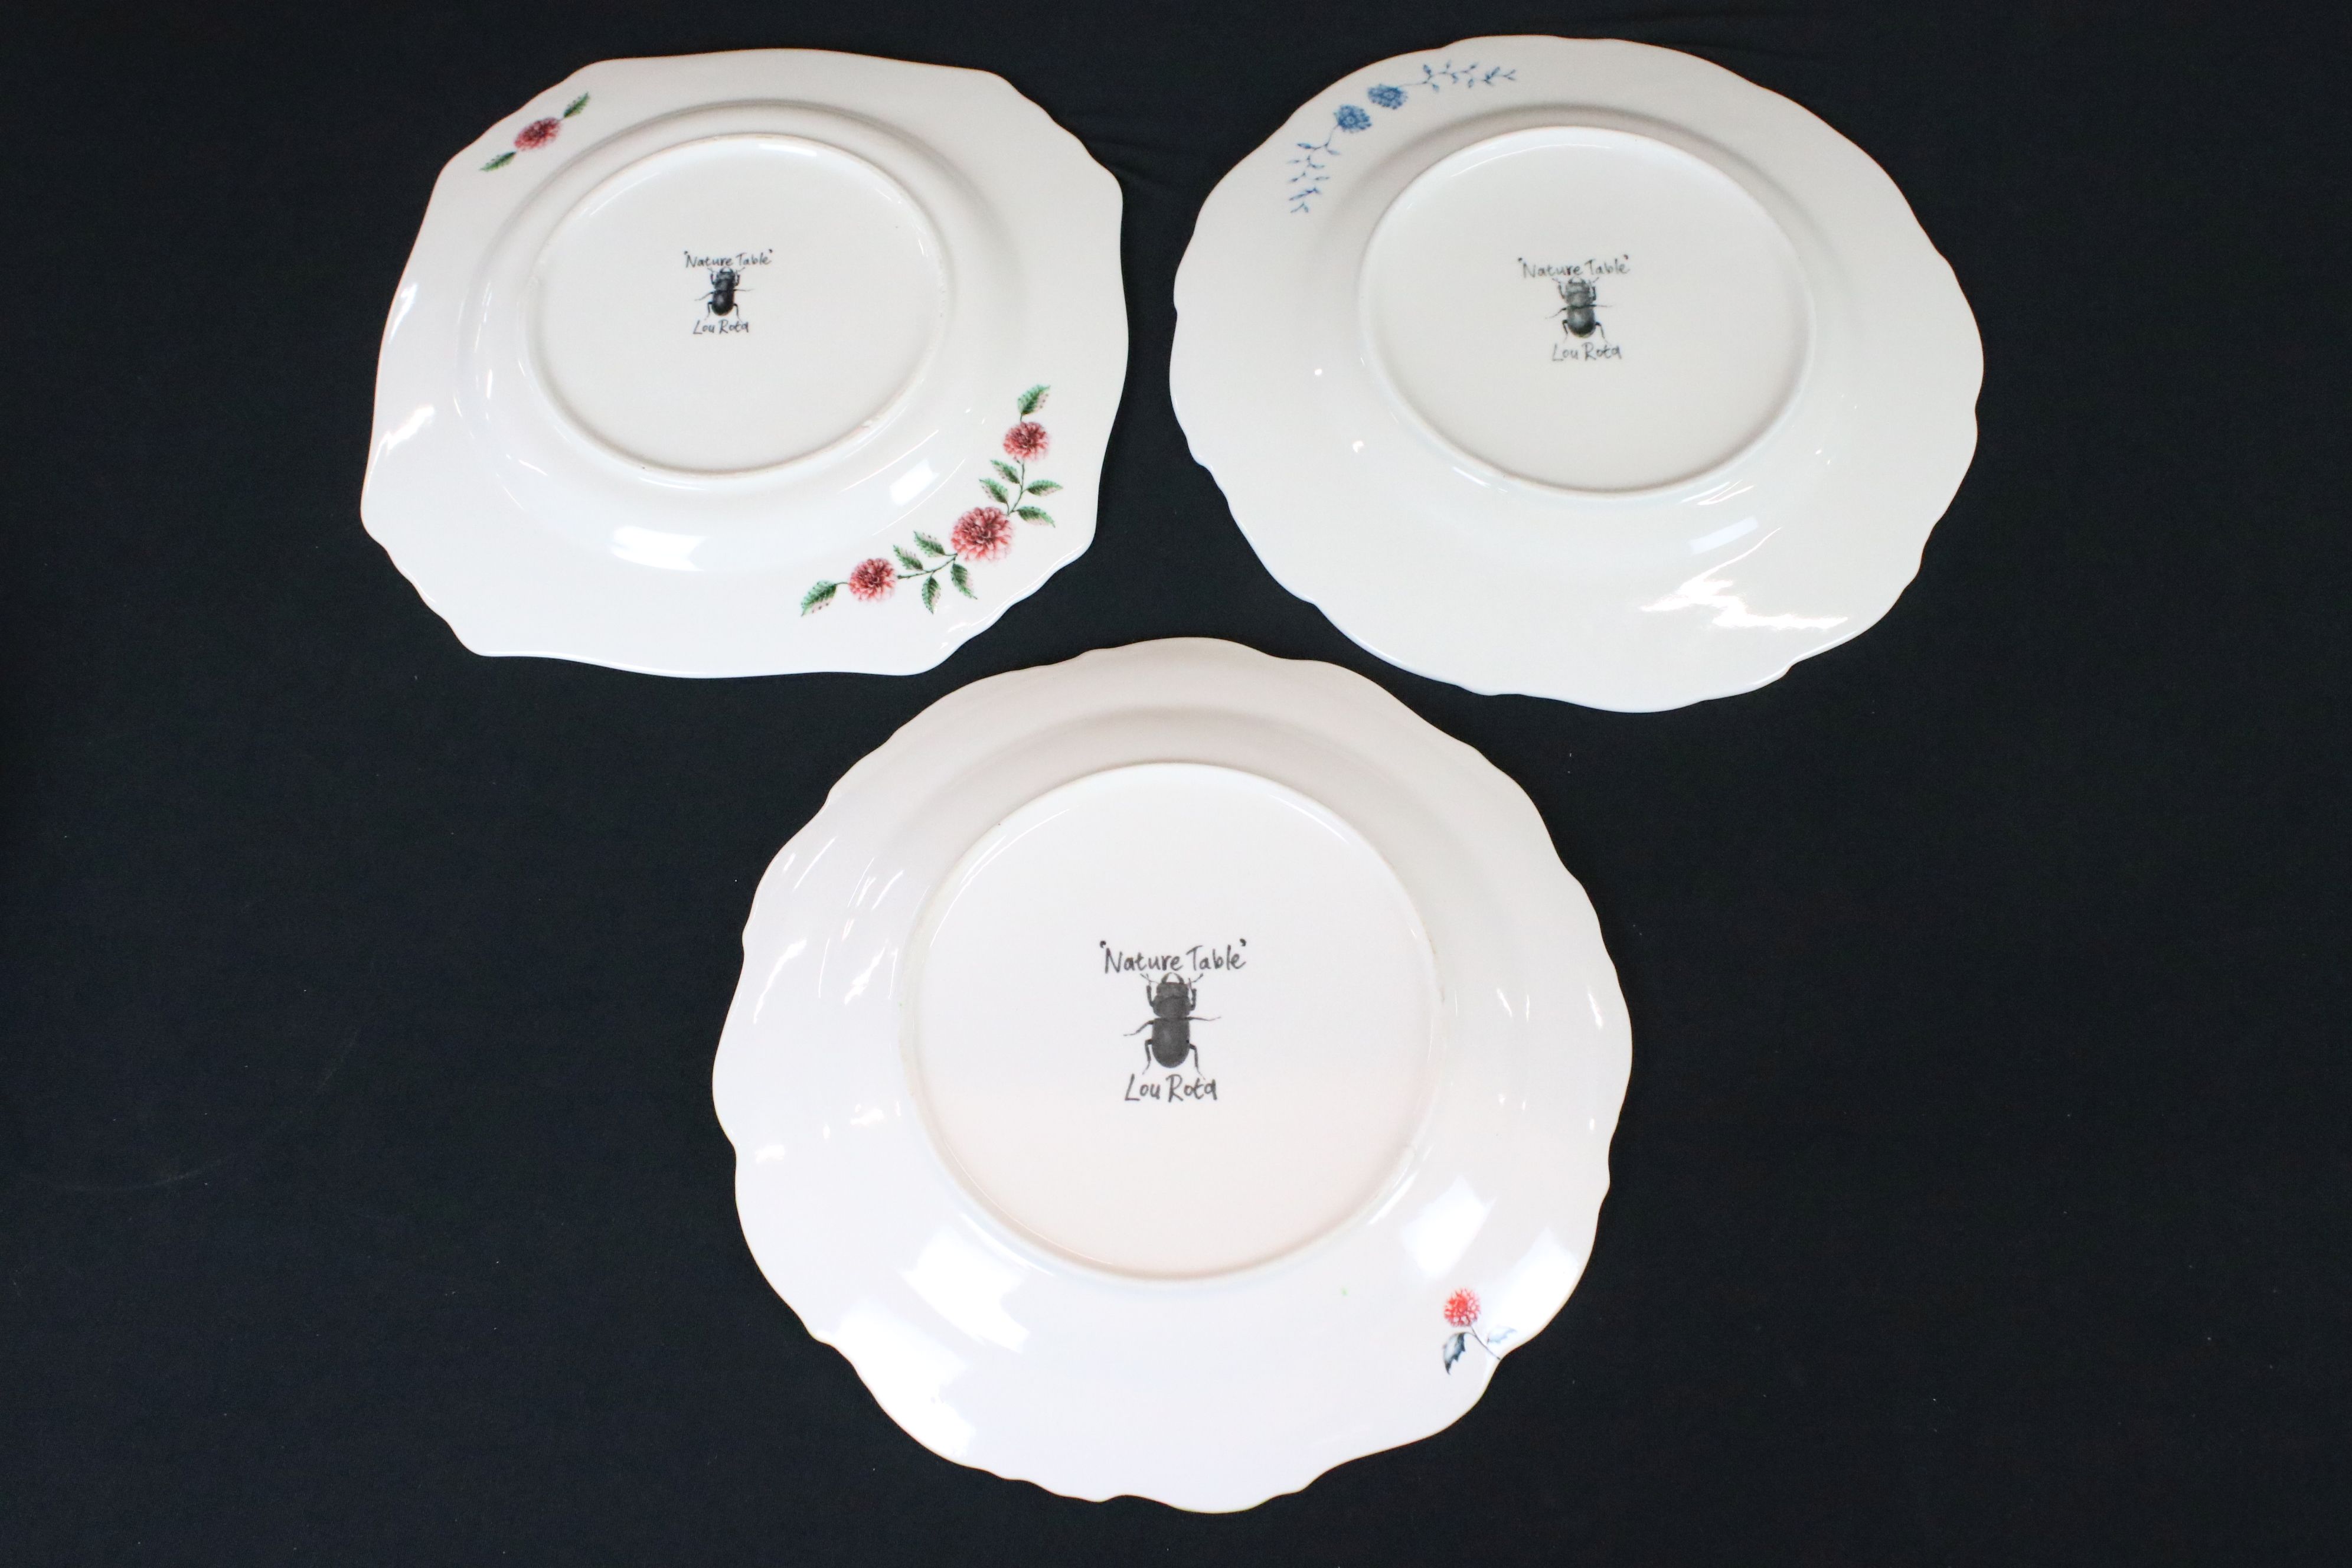 Set of Six ' Nature Table ' Plates designed by Lou Rota, 24cm diameter - Image 10 of 10